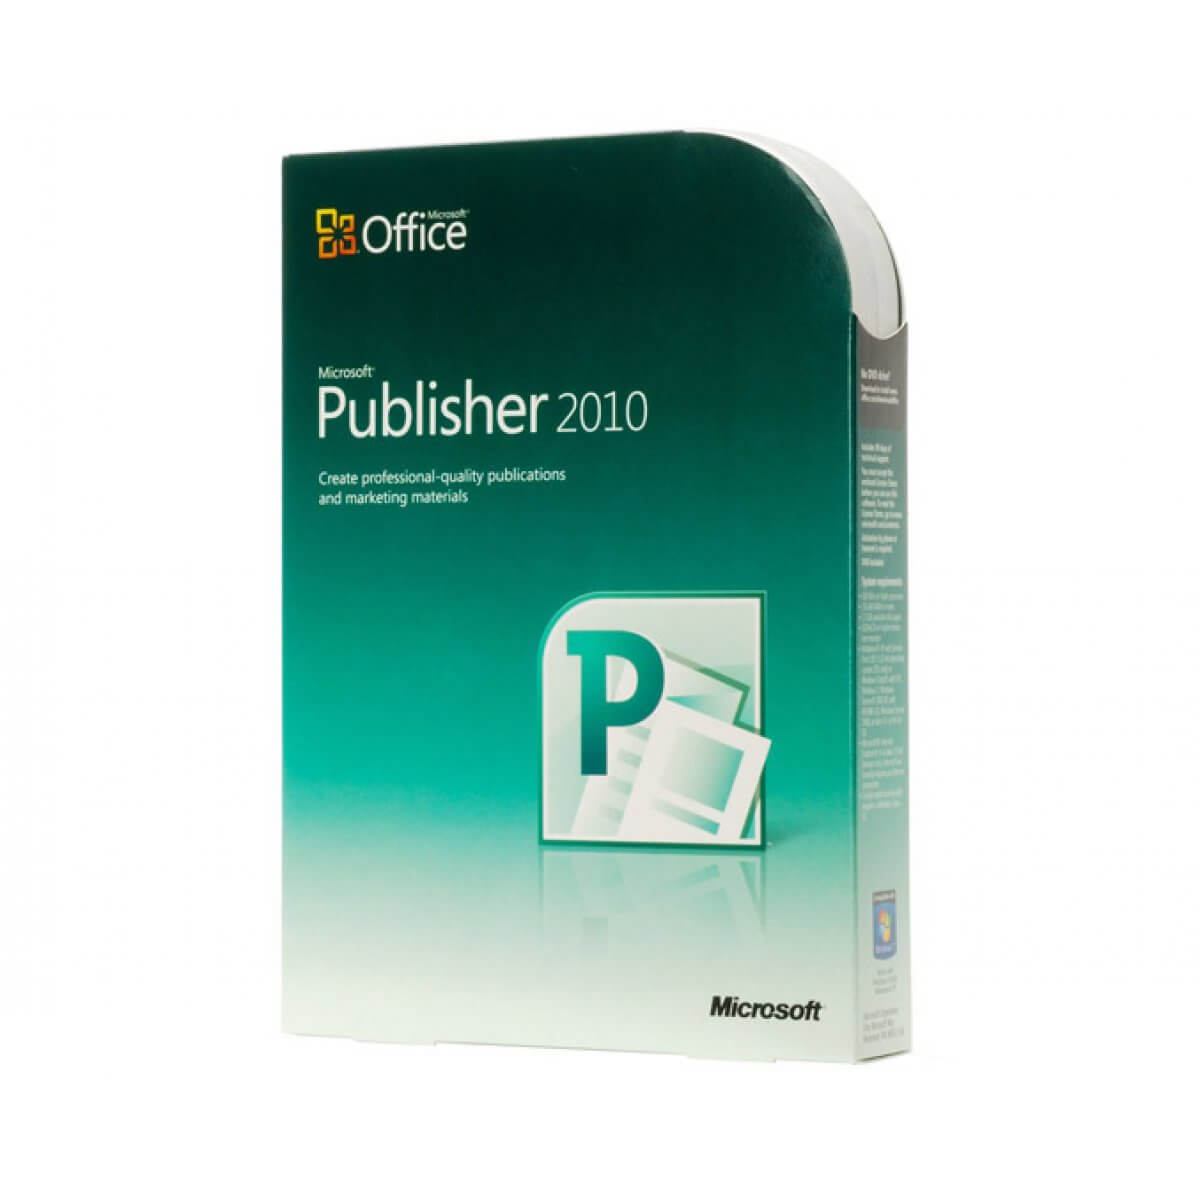 Microsoft Publisher 2010 Free Download For Mac